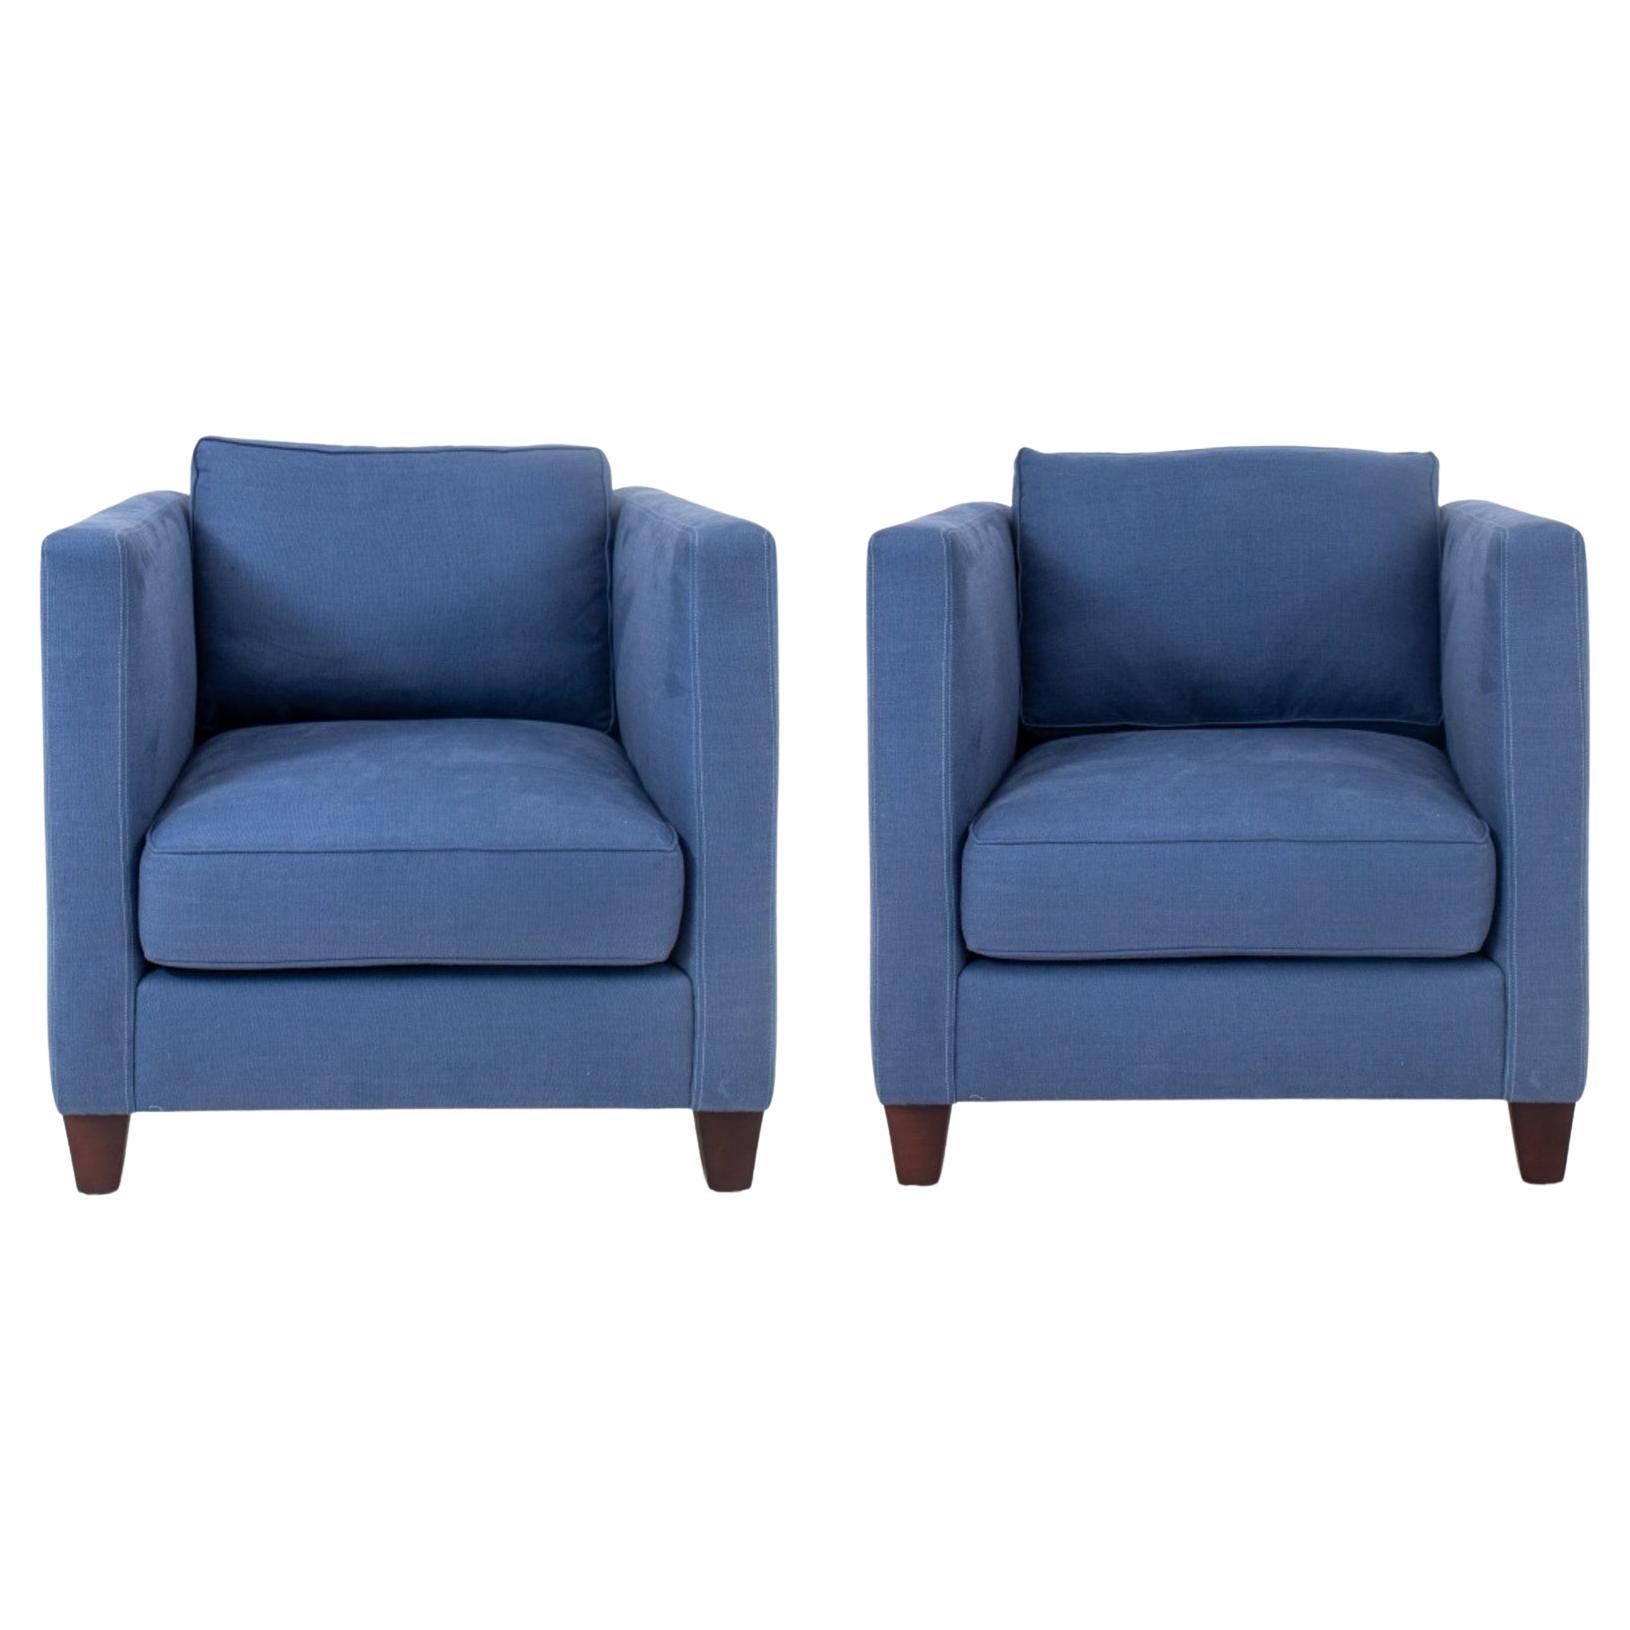 Modern Square Upholstered Arm Chairs, 2 For Sale